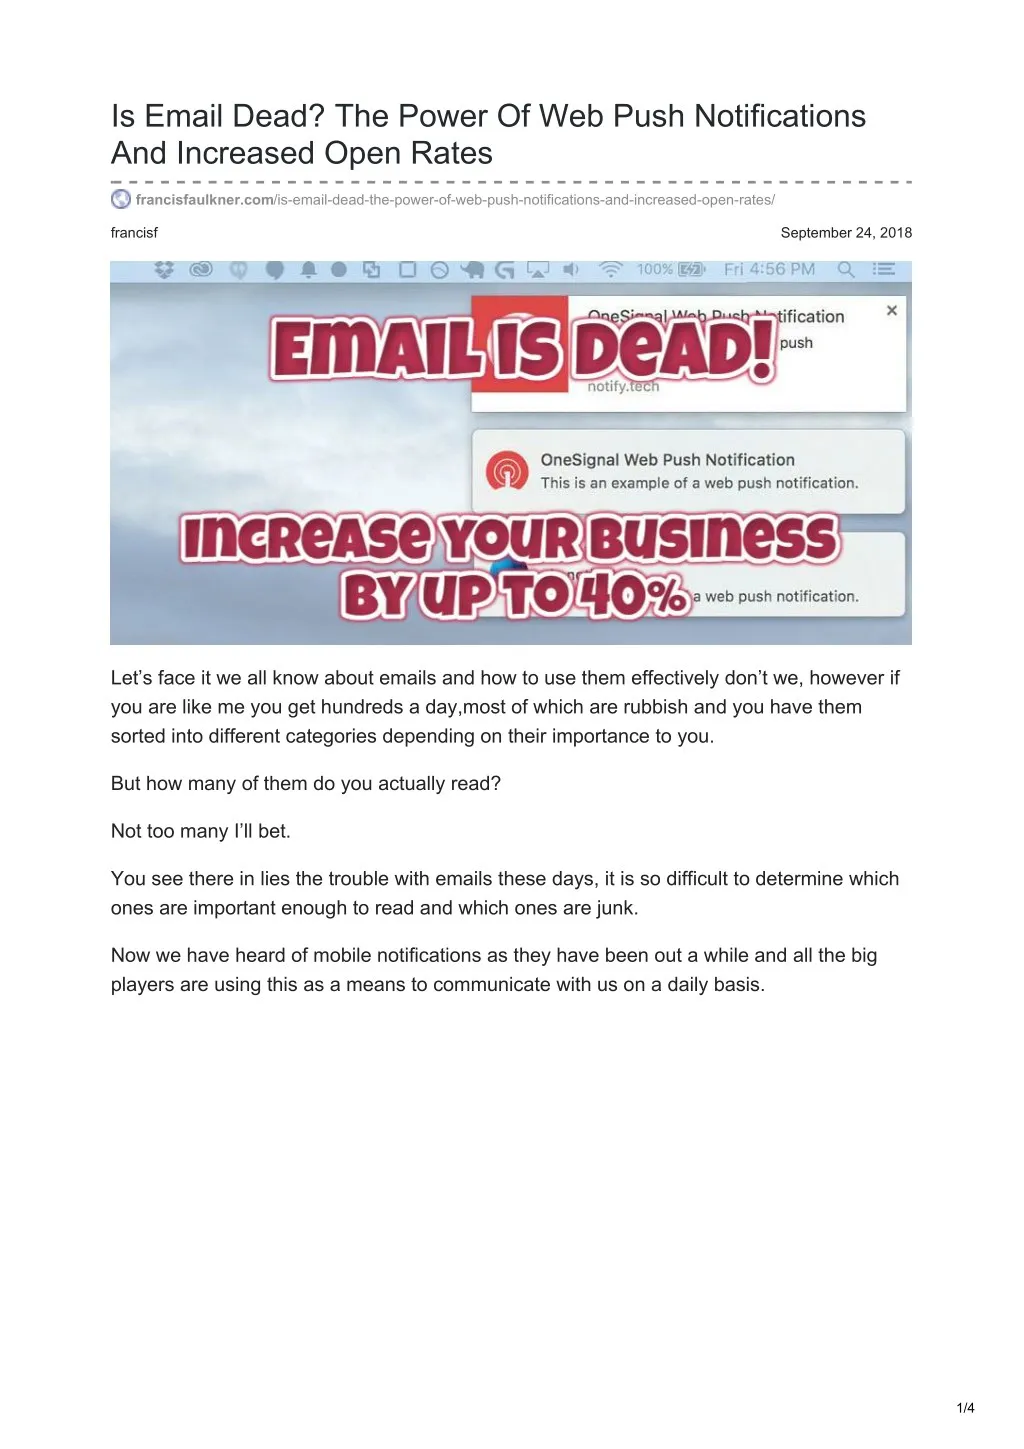 is email dead the power of web push notifications